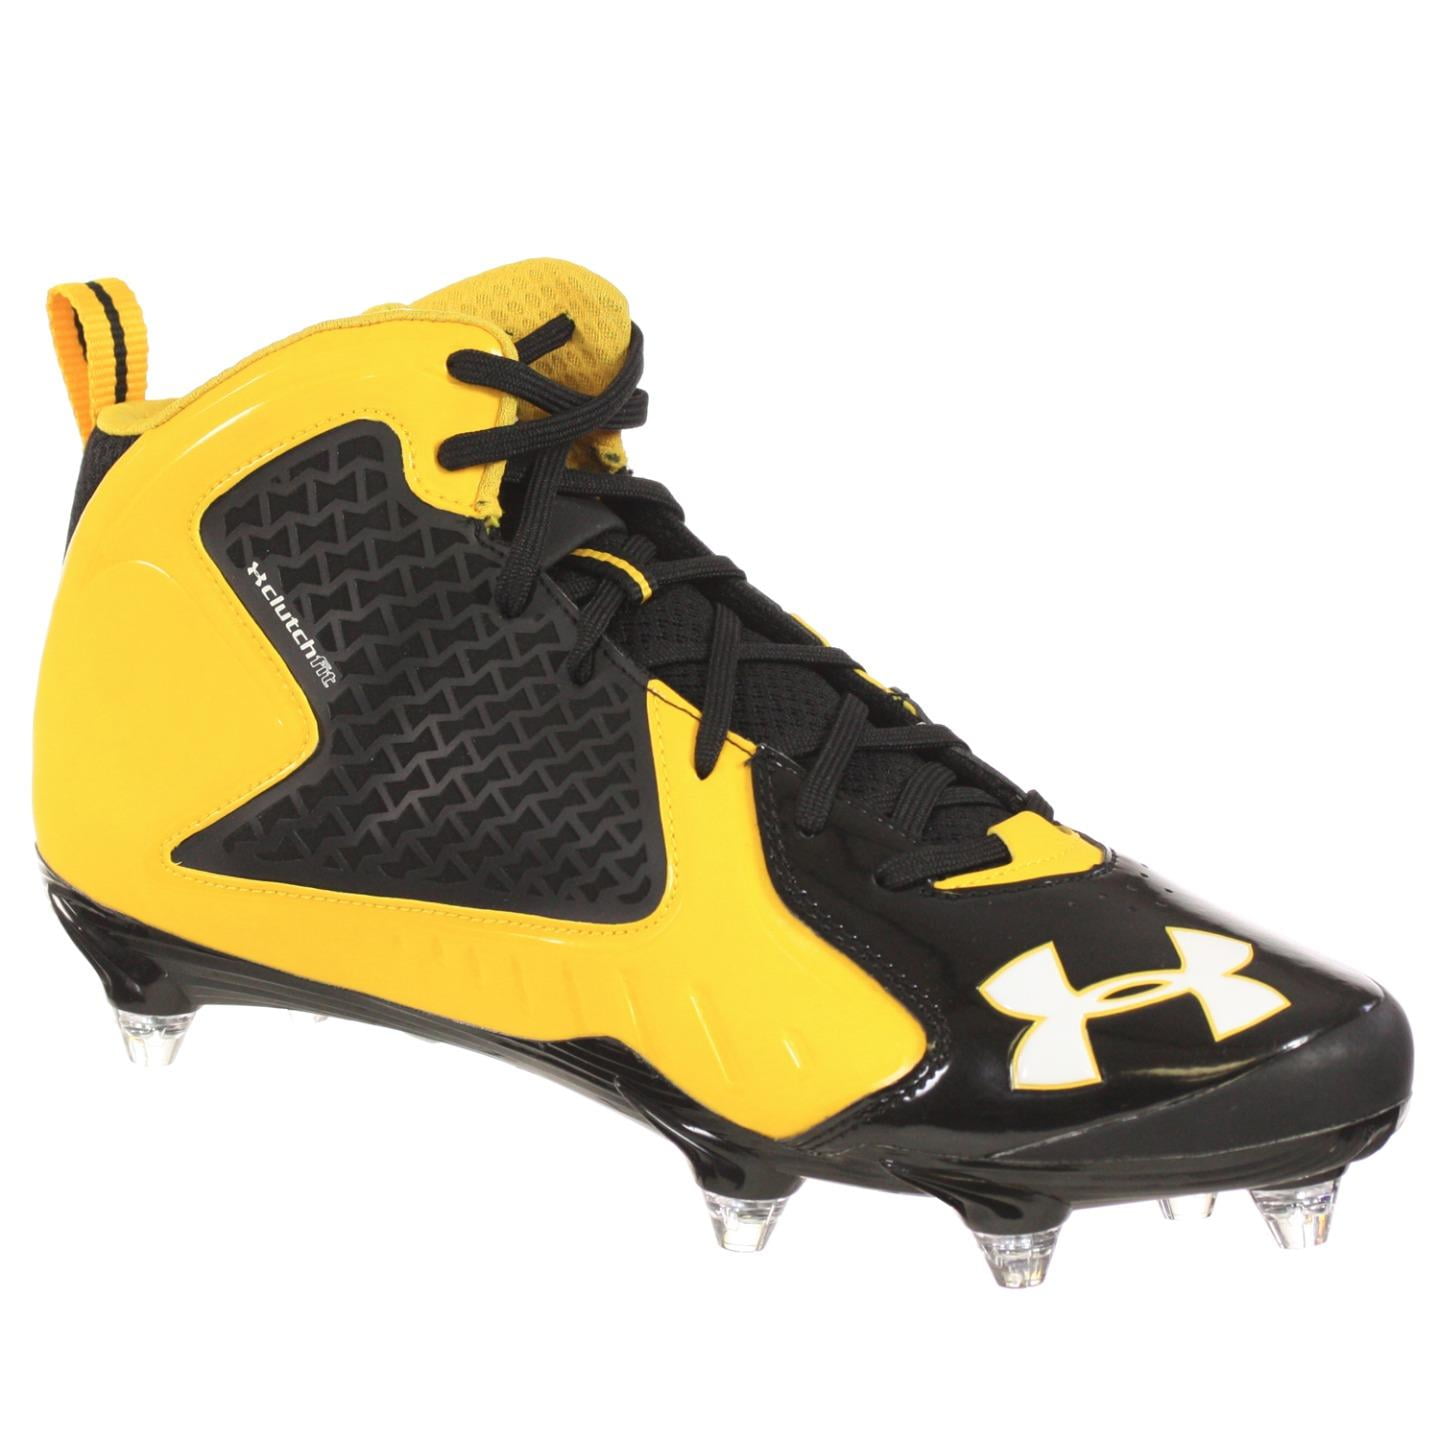 football cleats black and yellow